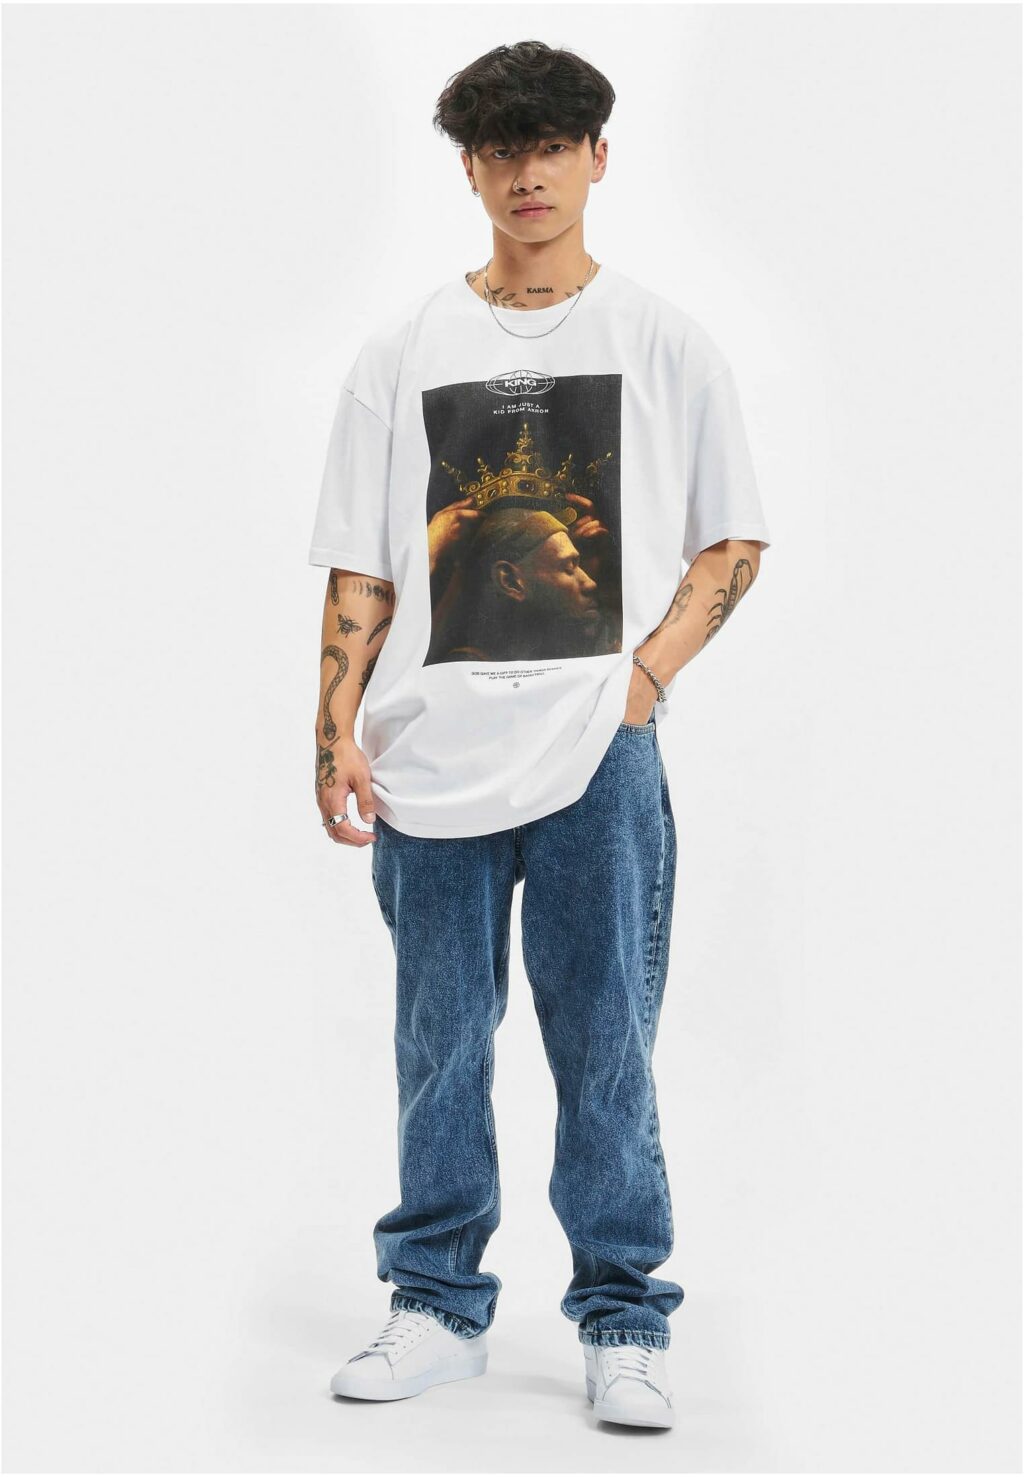 Kid from Akron Oversize Tee white MT1895